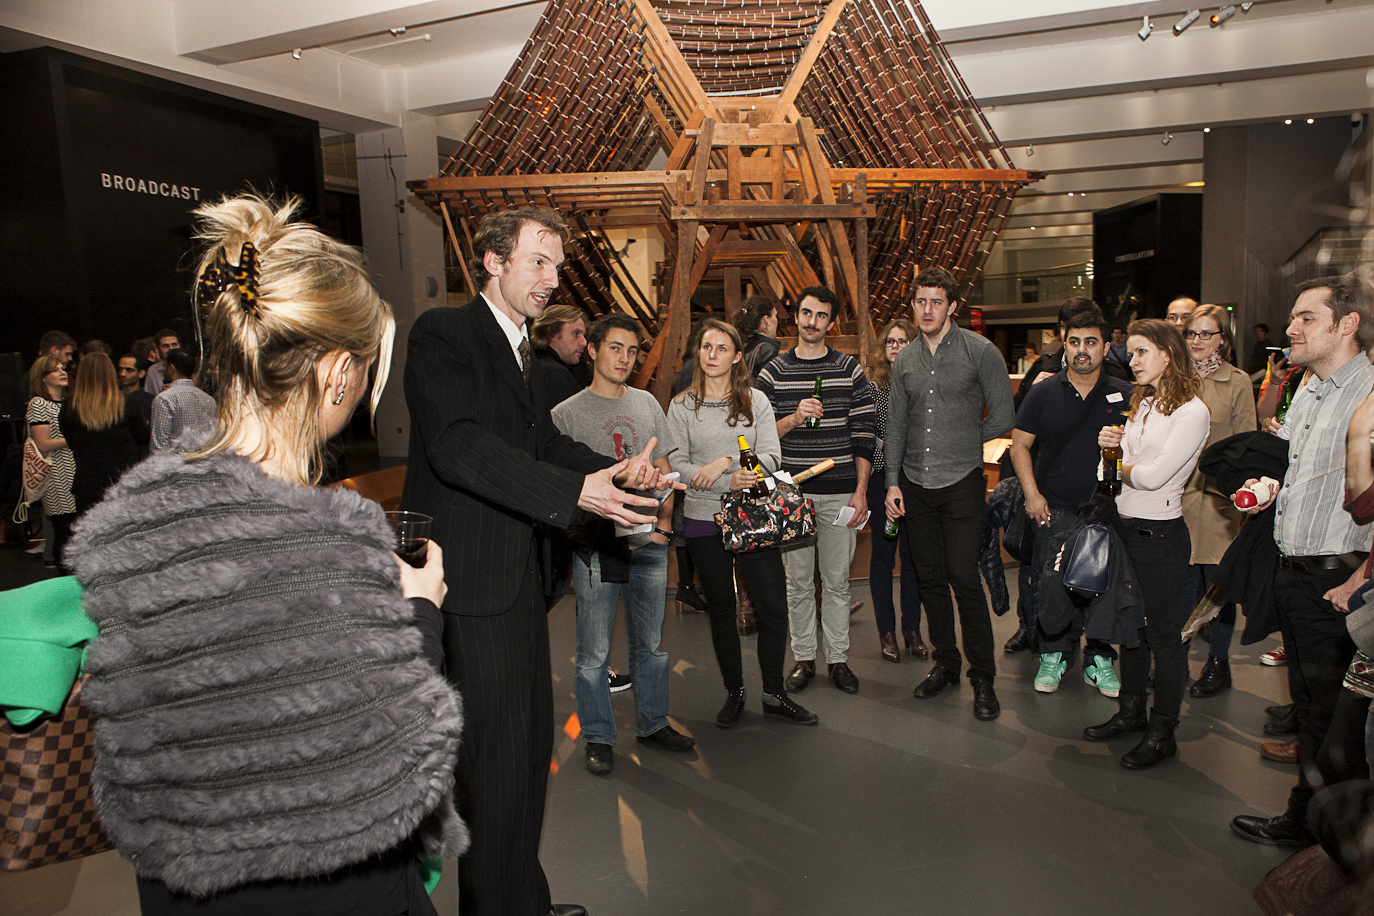 The Claude Shannon drama character entertains visitors in the Information Age gallery. Image credit: Science Museum